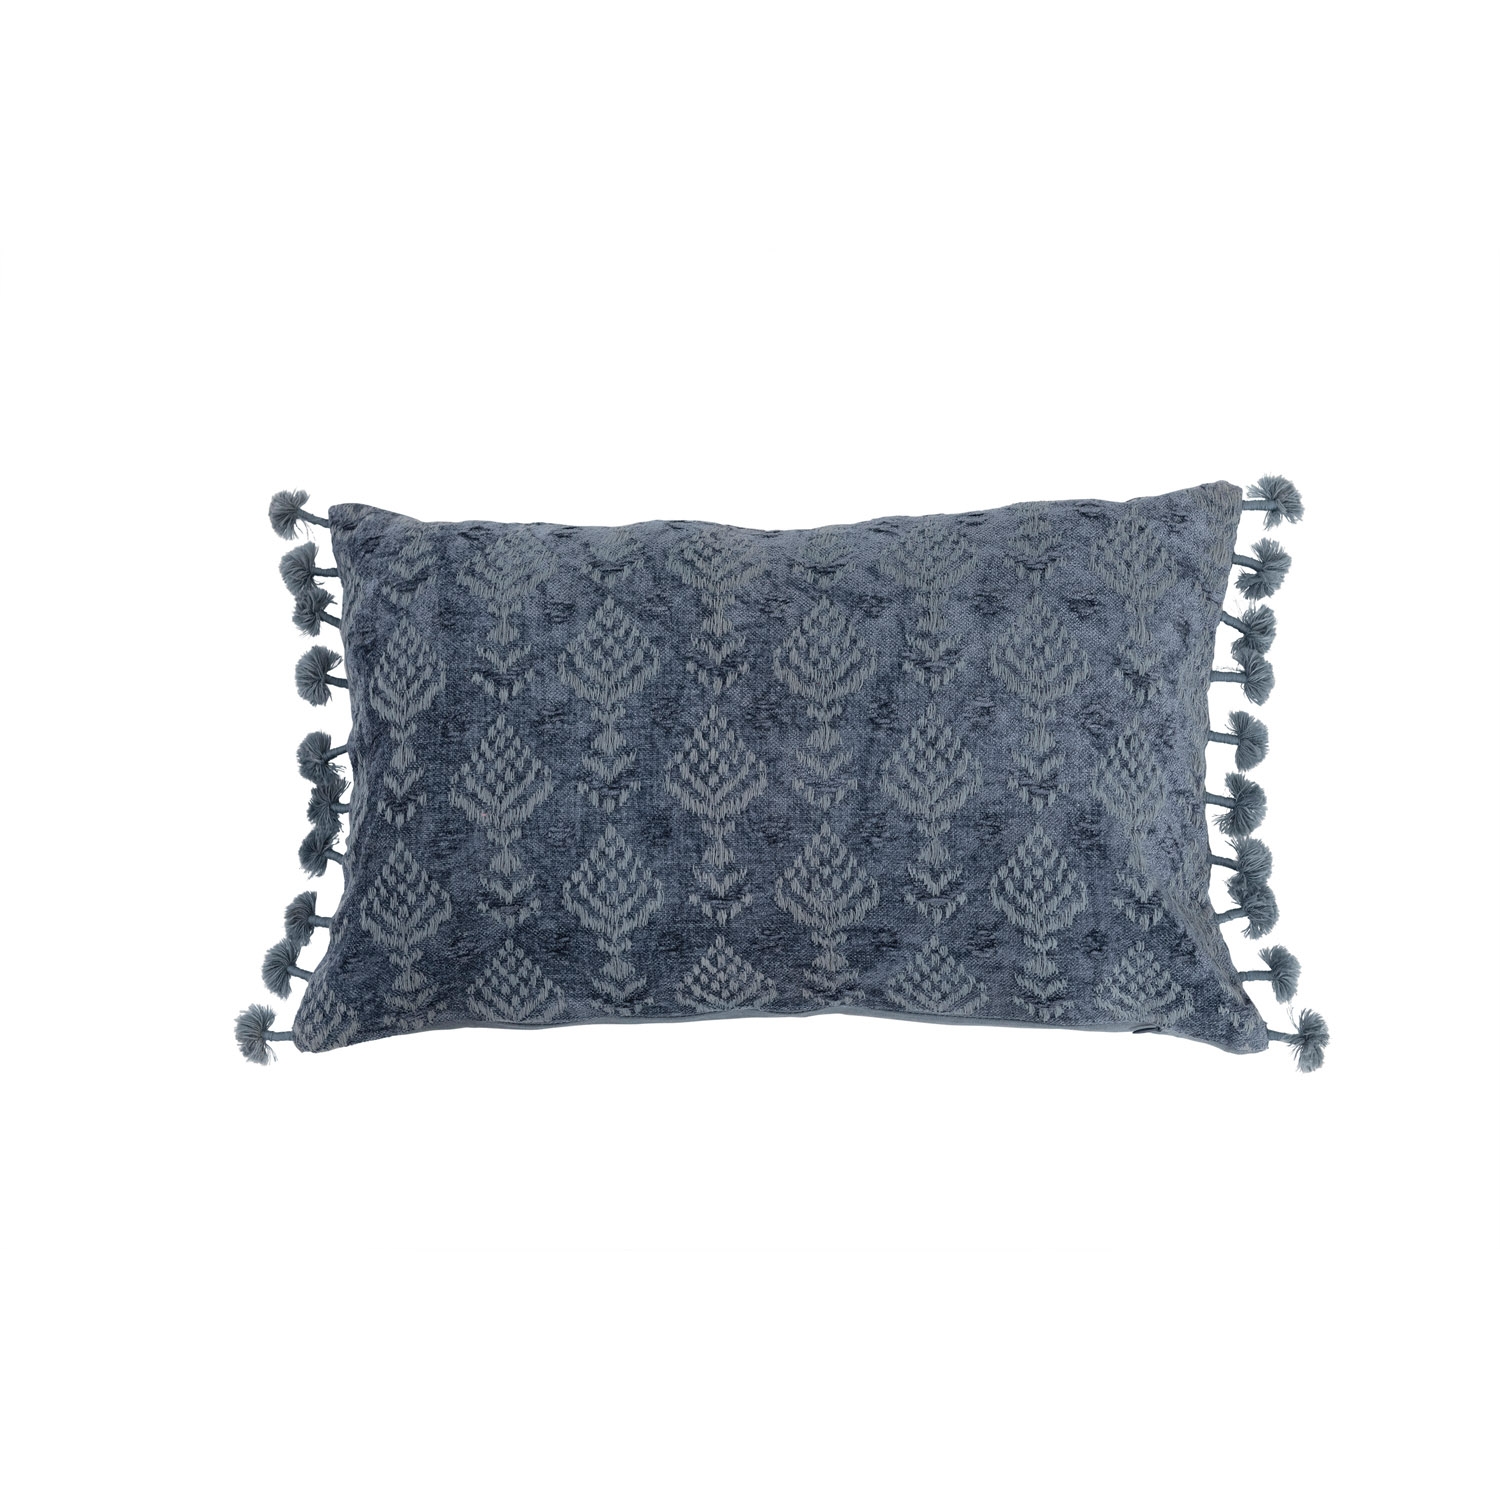 Cotton Chenille Lumbar Pillow with Embroidery and Tassels - Image 0